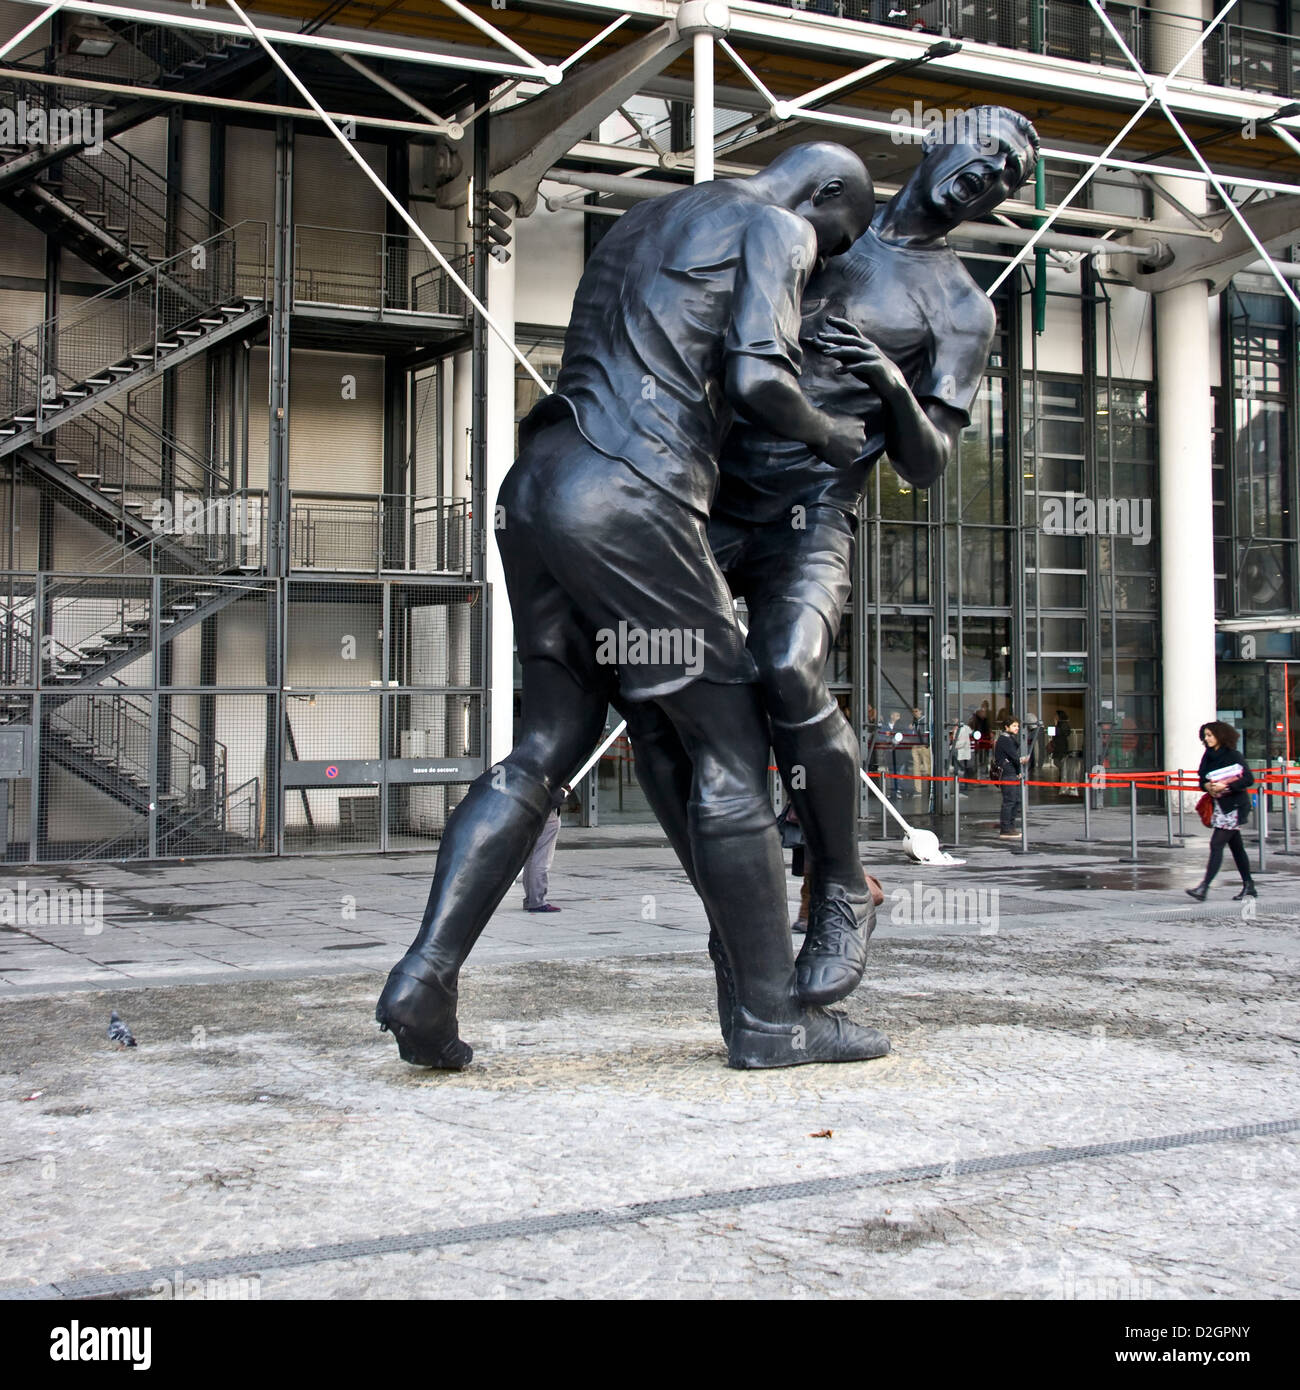 Statue of Zidane's headbutt of Marco Materazzi in a world cup match against Italy in 2006 Centre Georges Pompidou Paris France Stock Photo